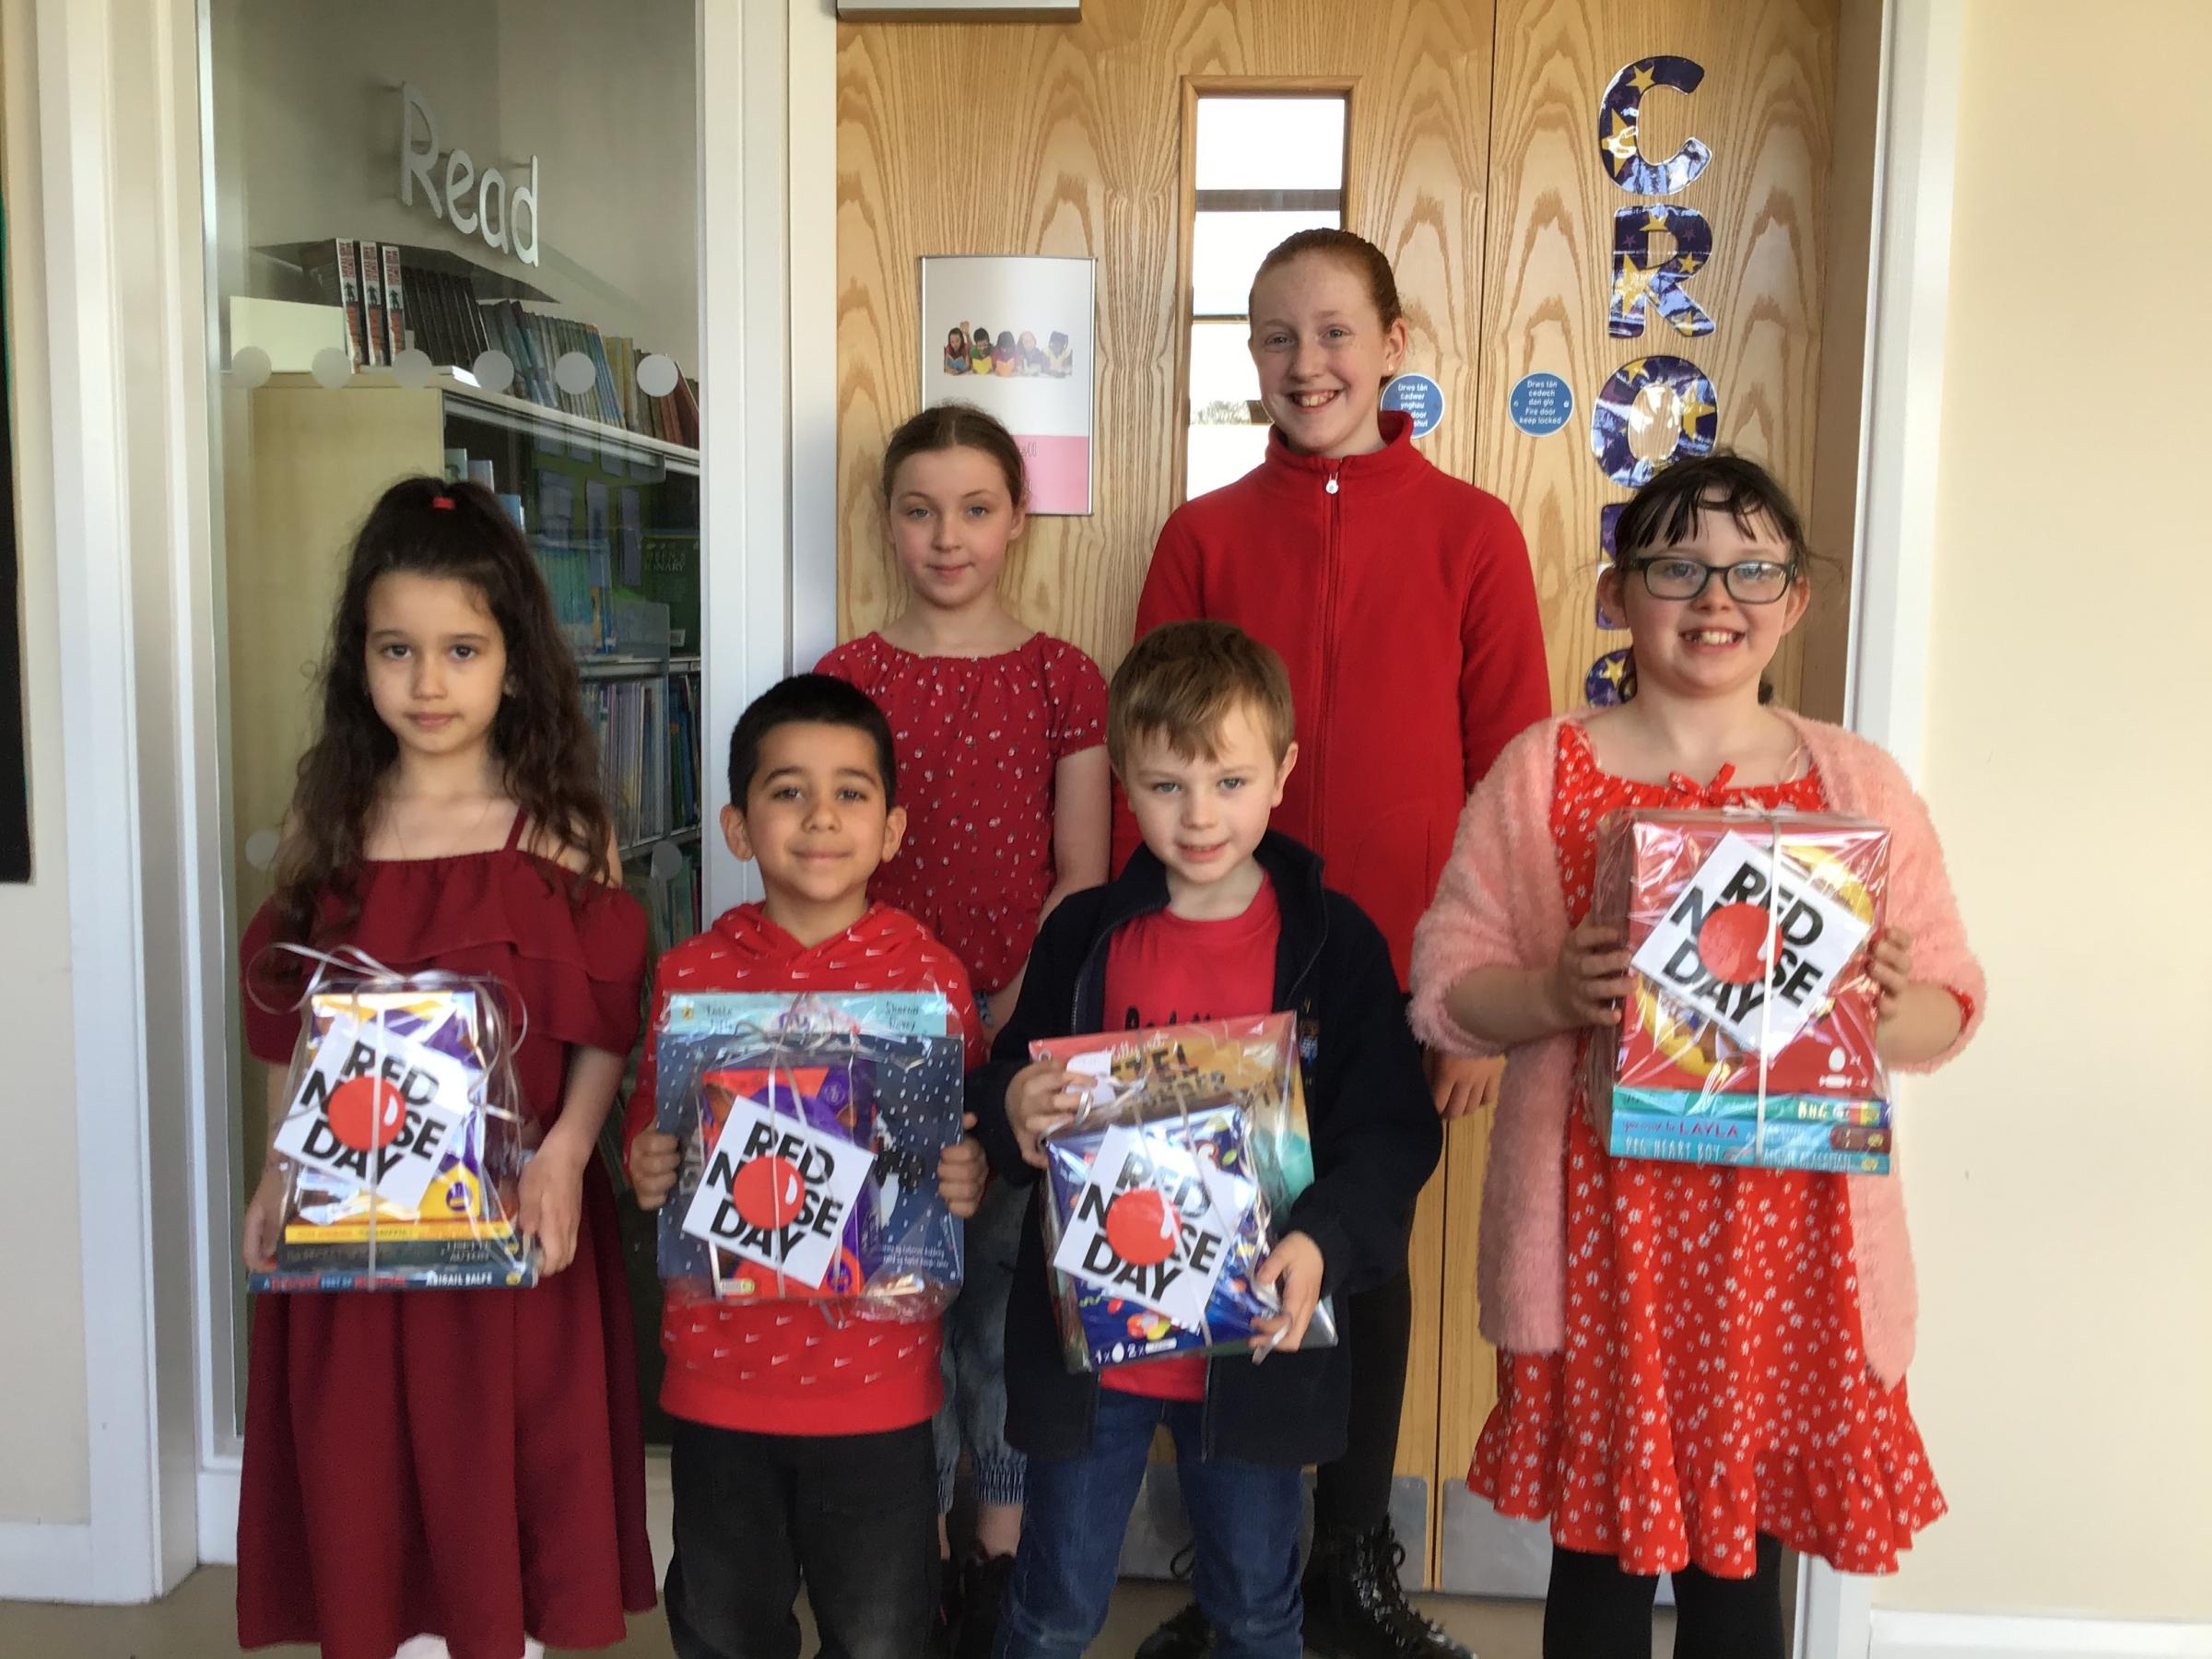 School councillors Ava and Evie, who presented prizes Red Nose Day winners Seren, Logan, Rowan and Adelina.